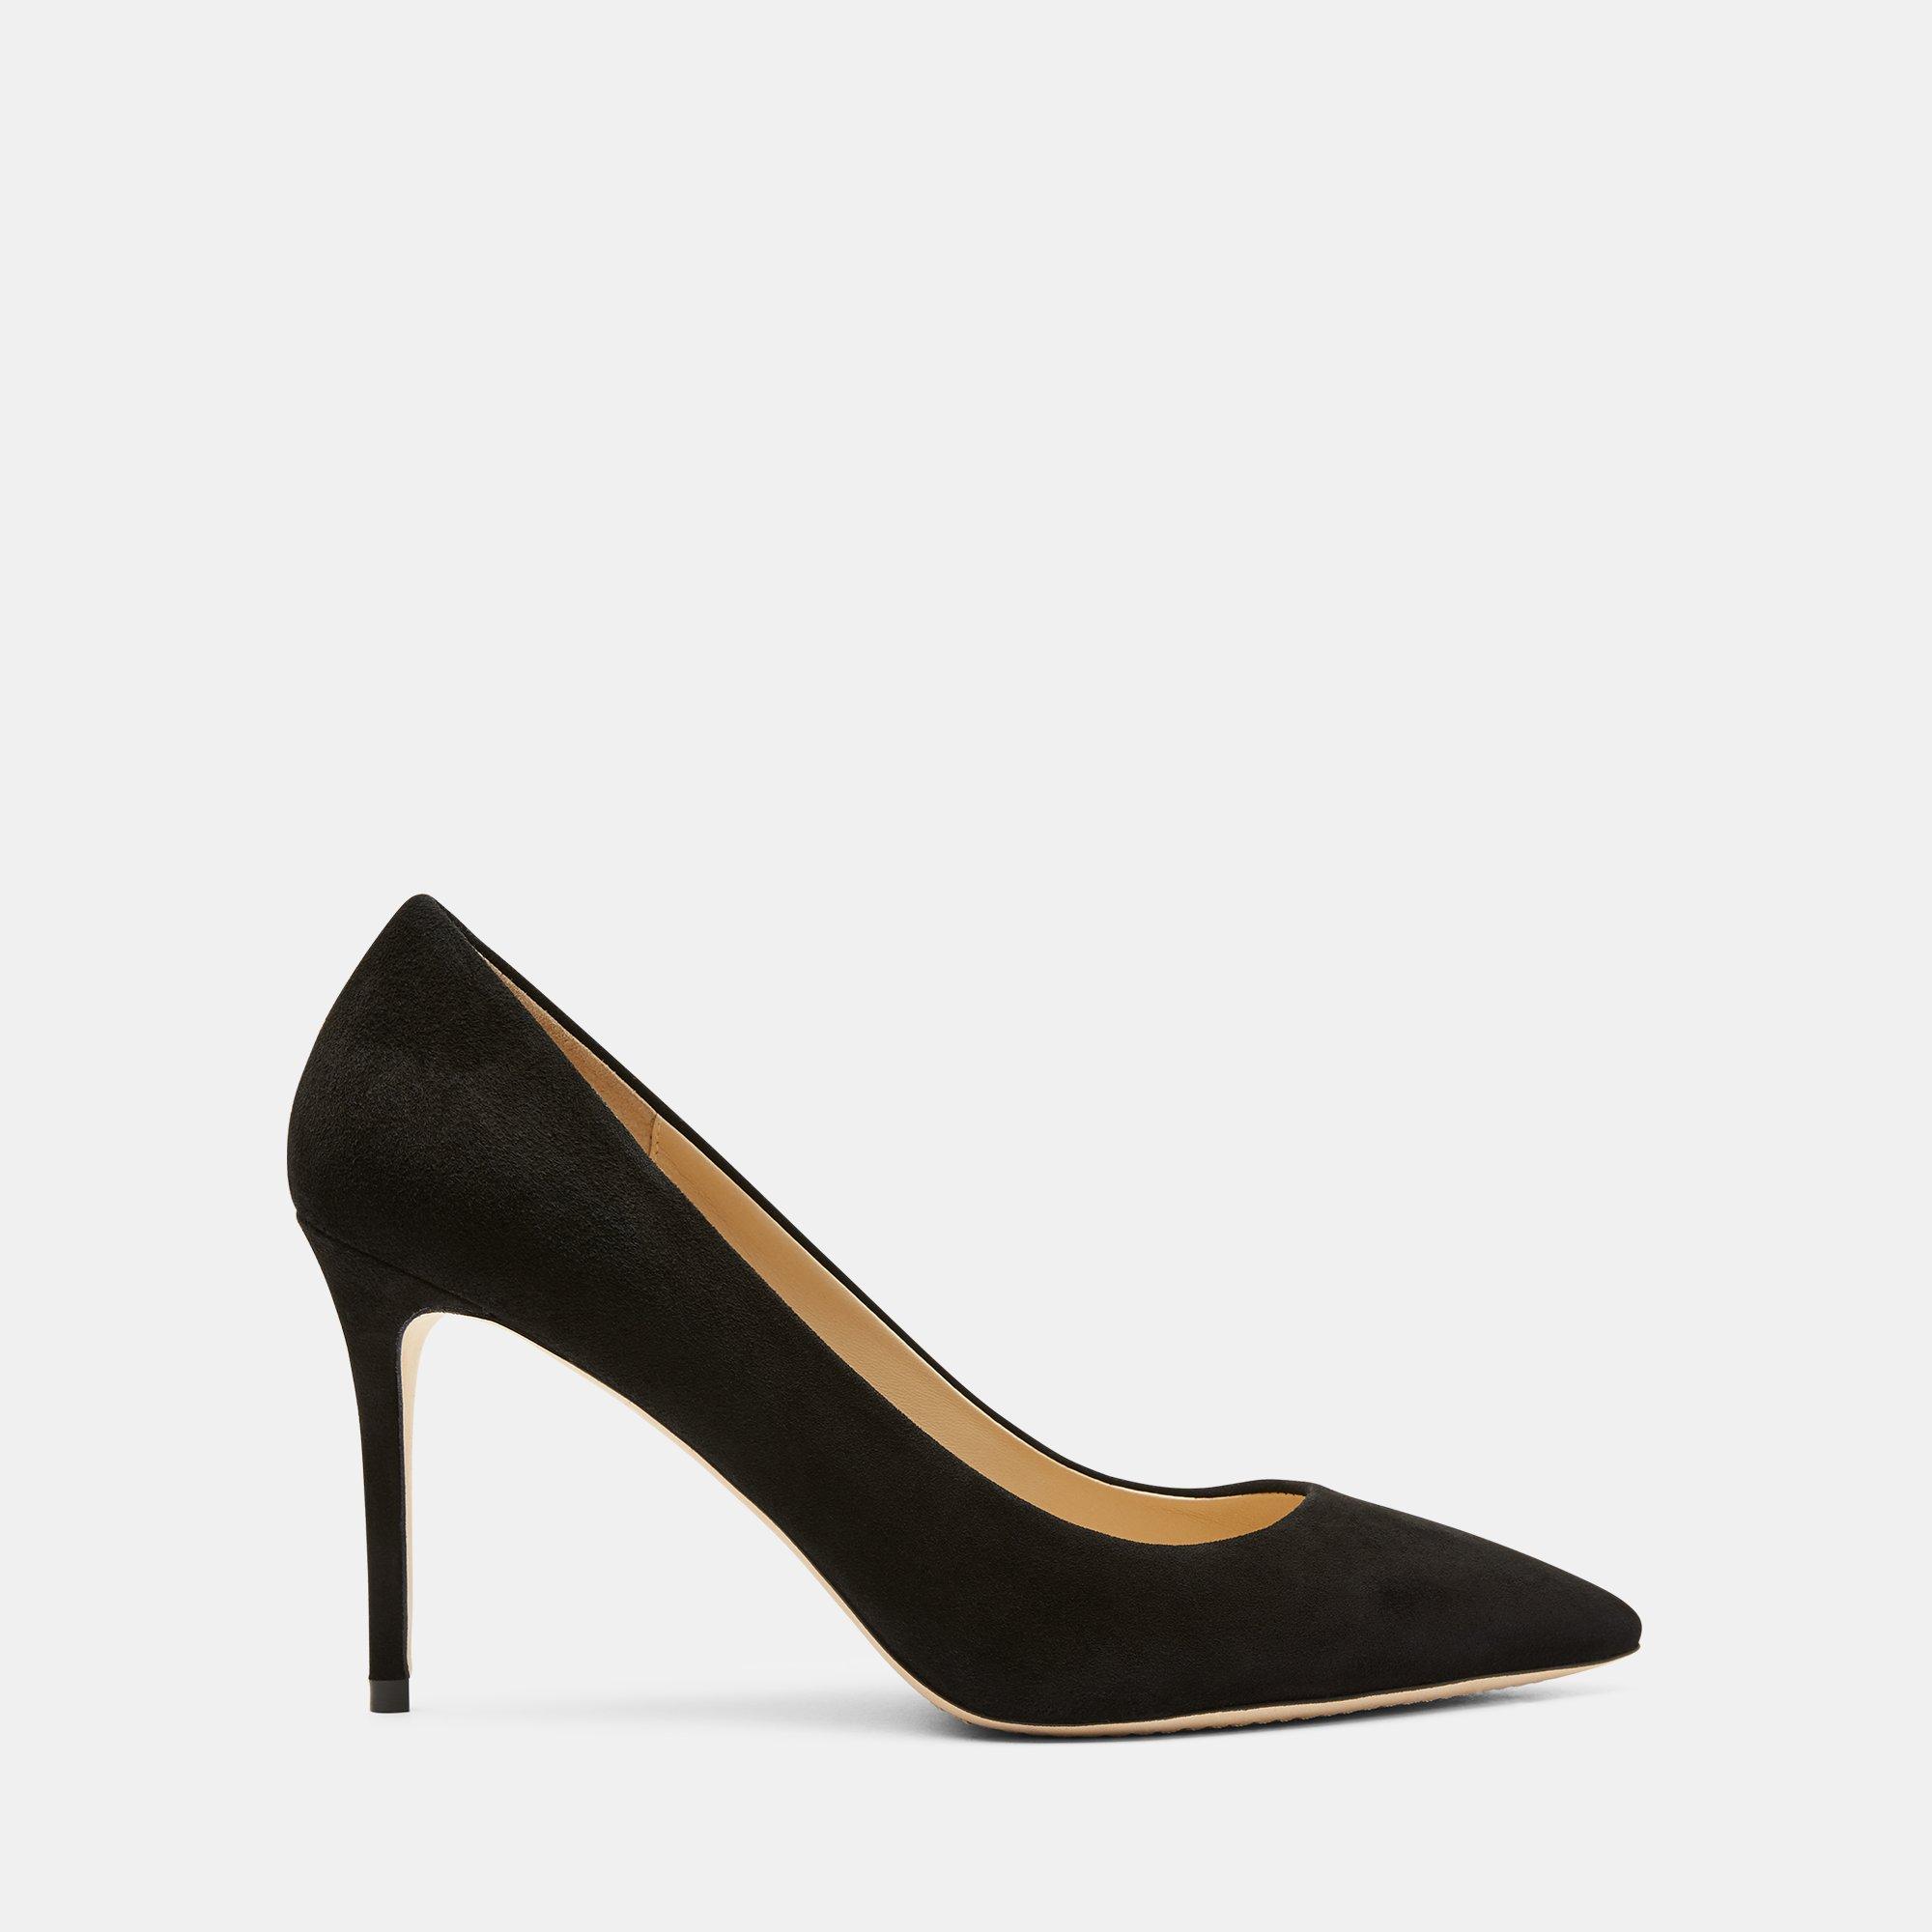 Theory City 85 Pump in Suede